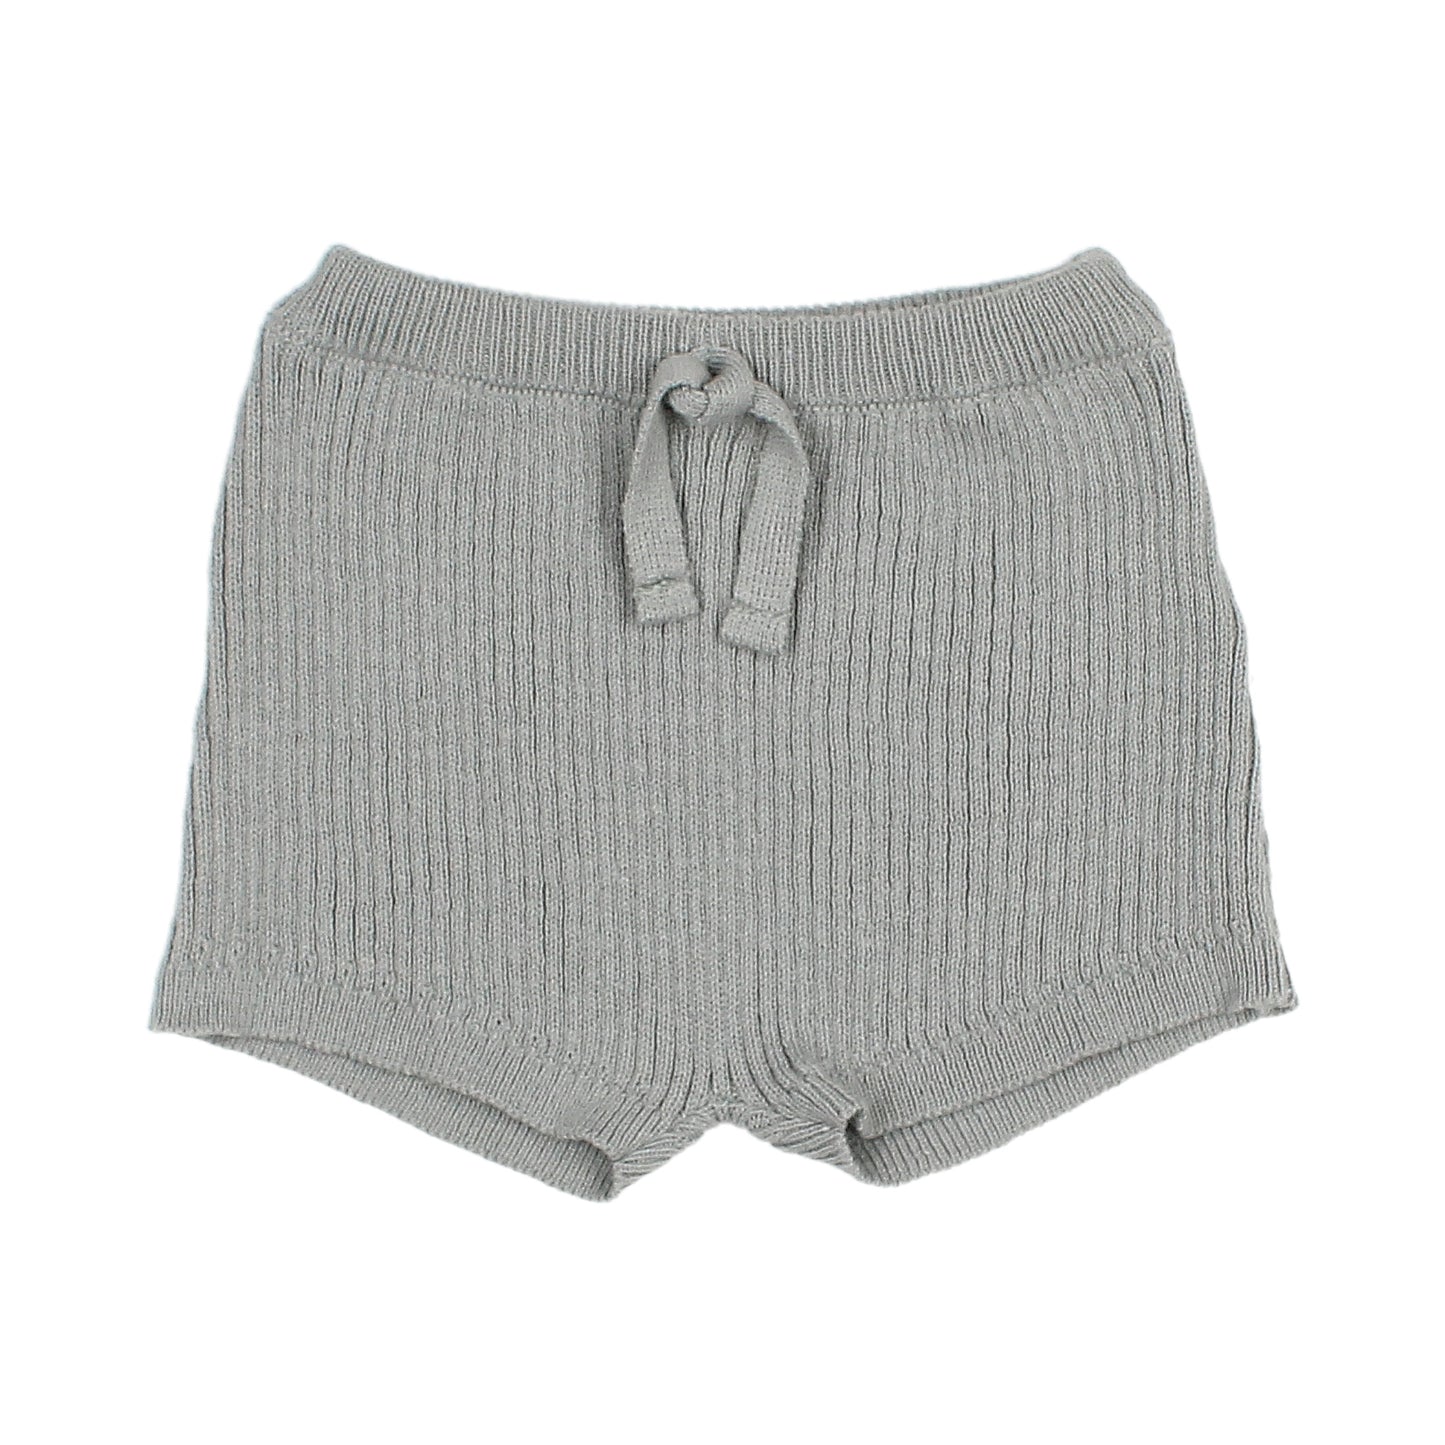 SHORTS TRICOT